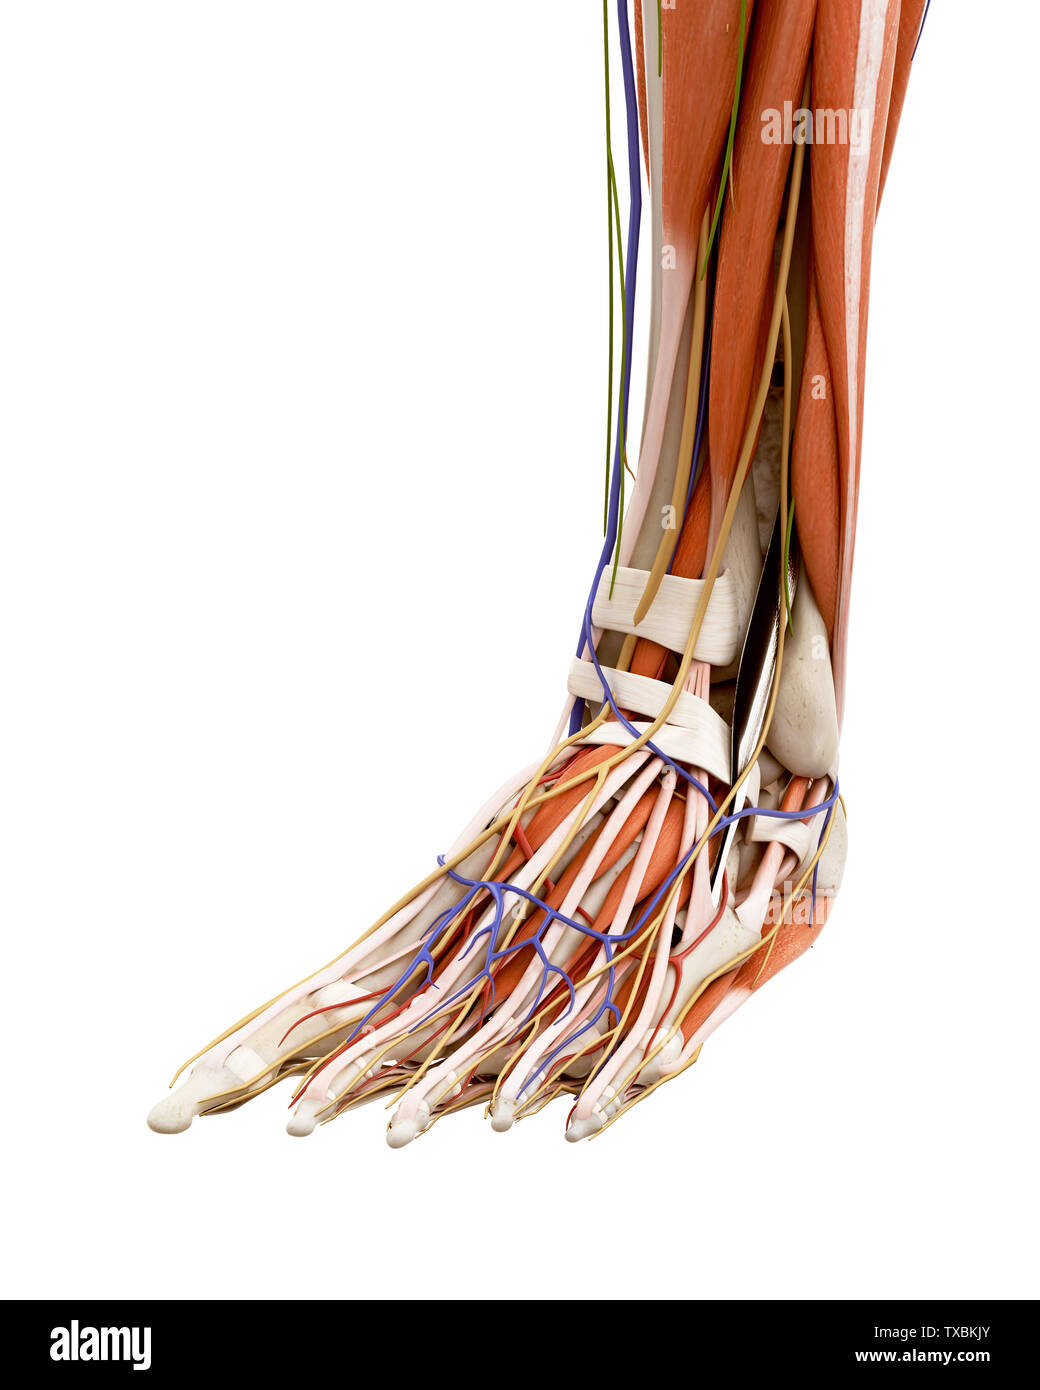 3d rendered medically accurate illustration of the human foot anatomy Stock Photo